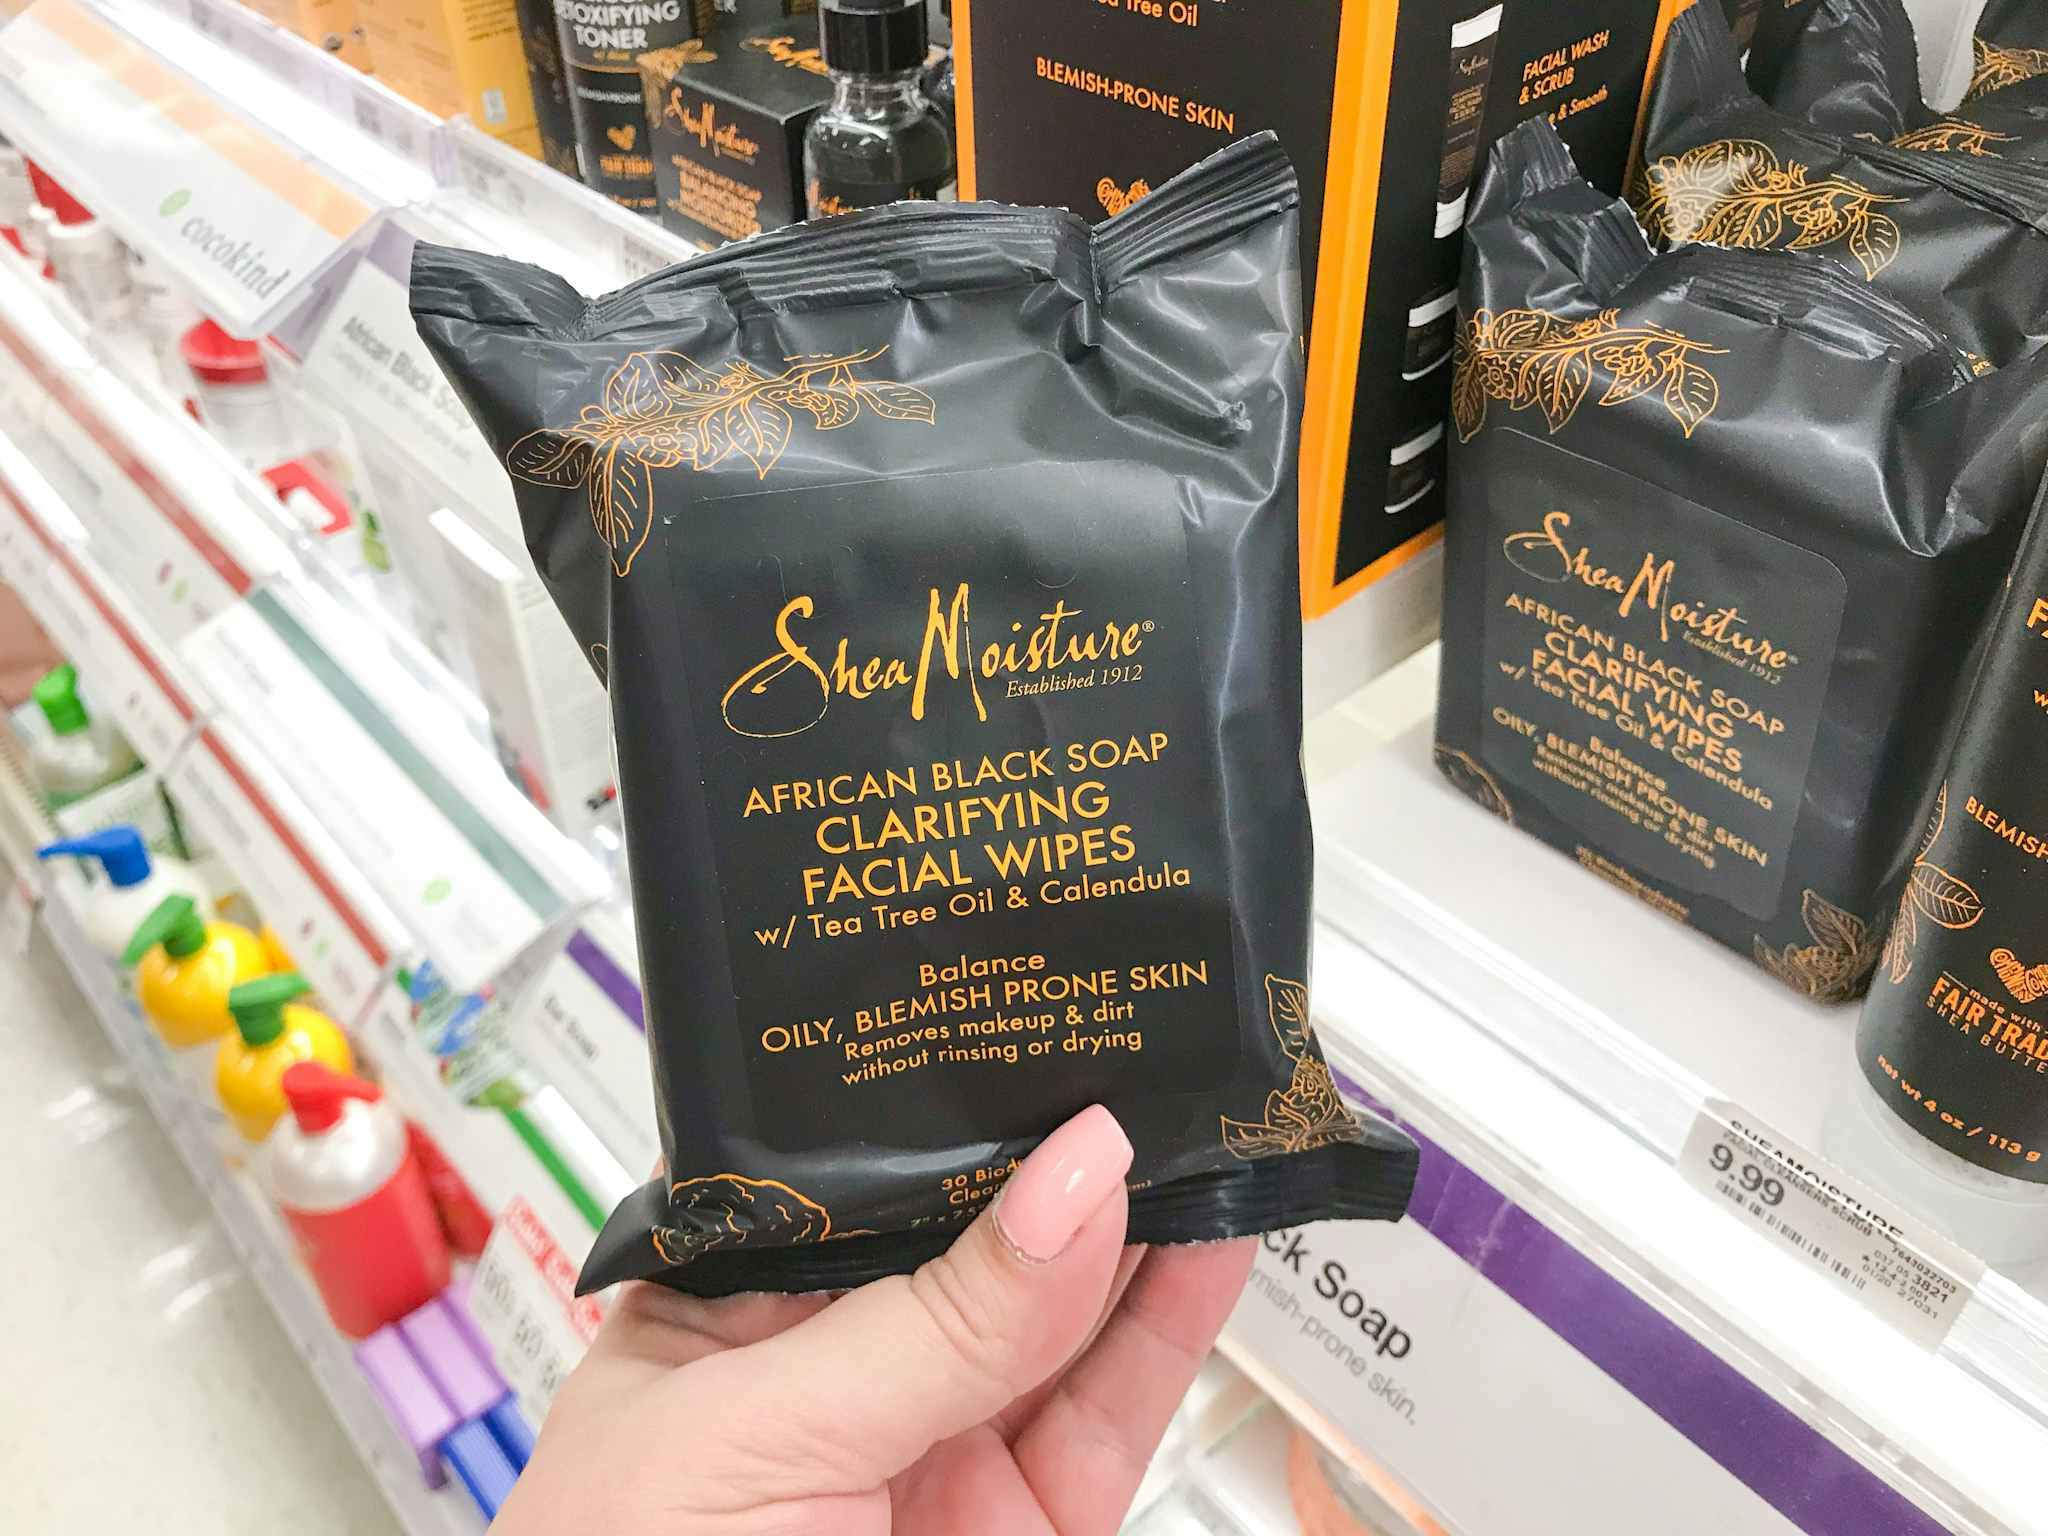 hand holding sheamoisture facial wipes at target